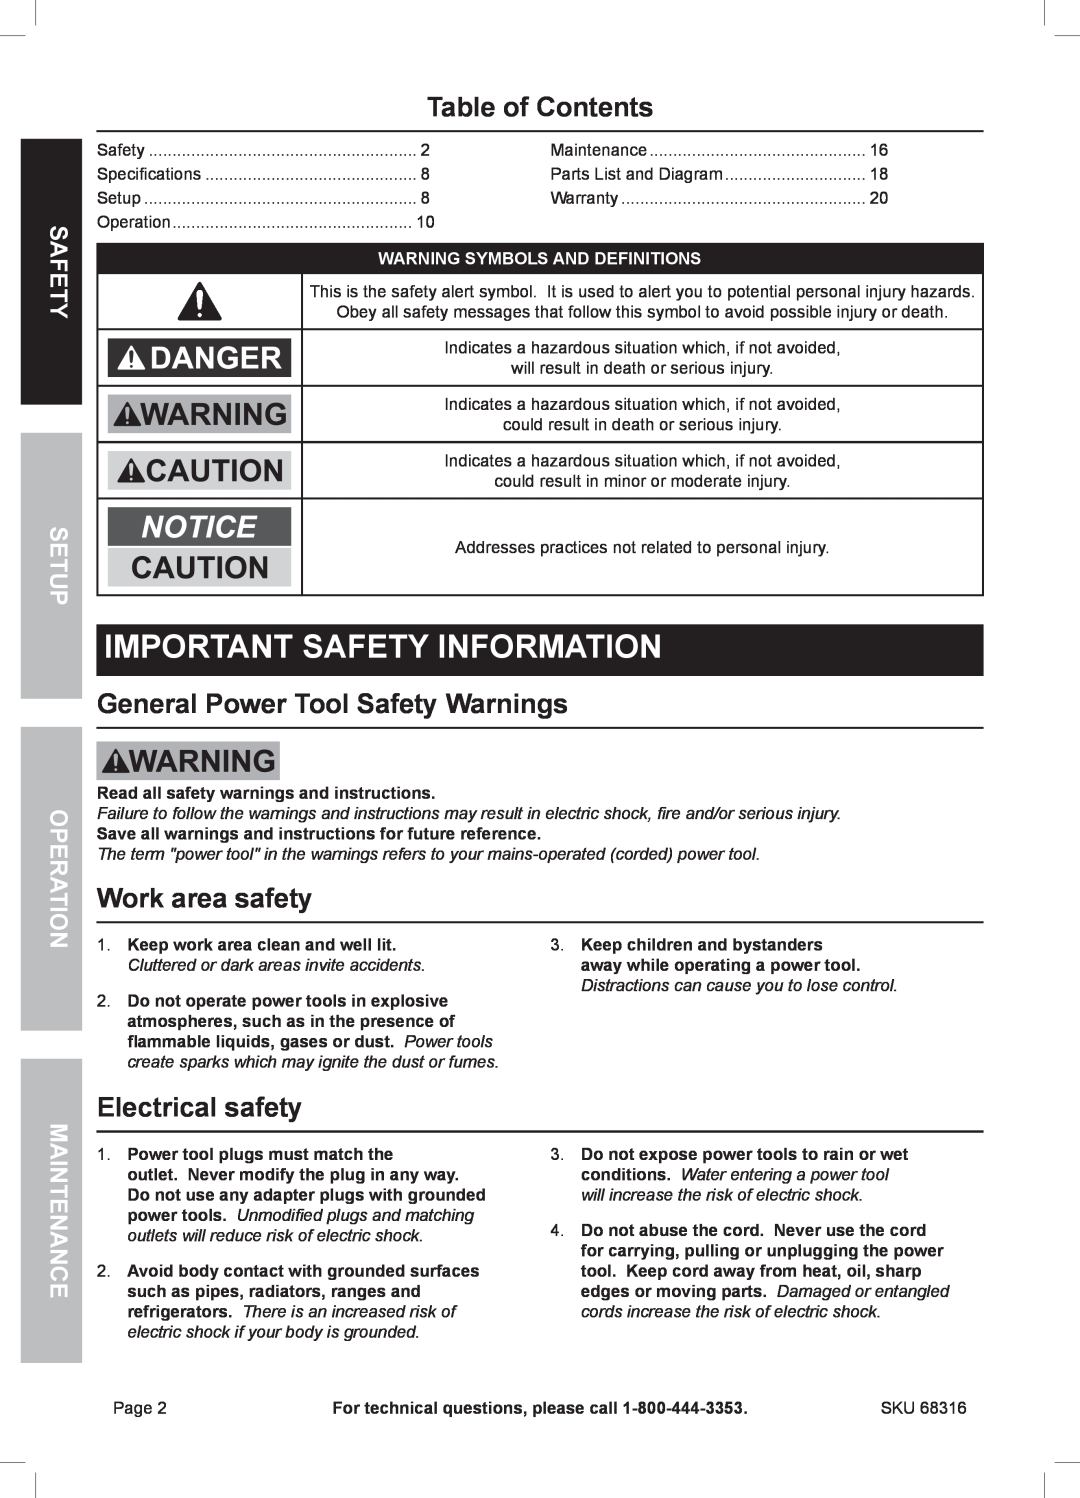 Chicago Electric 68316 Table of Contents, General Power Tool Safety Warnings, Work area safety, Electrical safety 